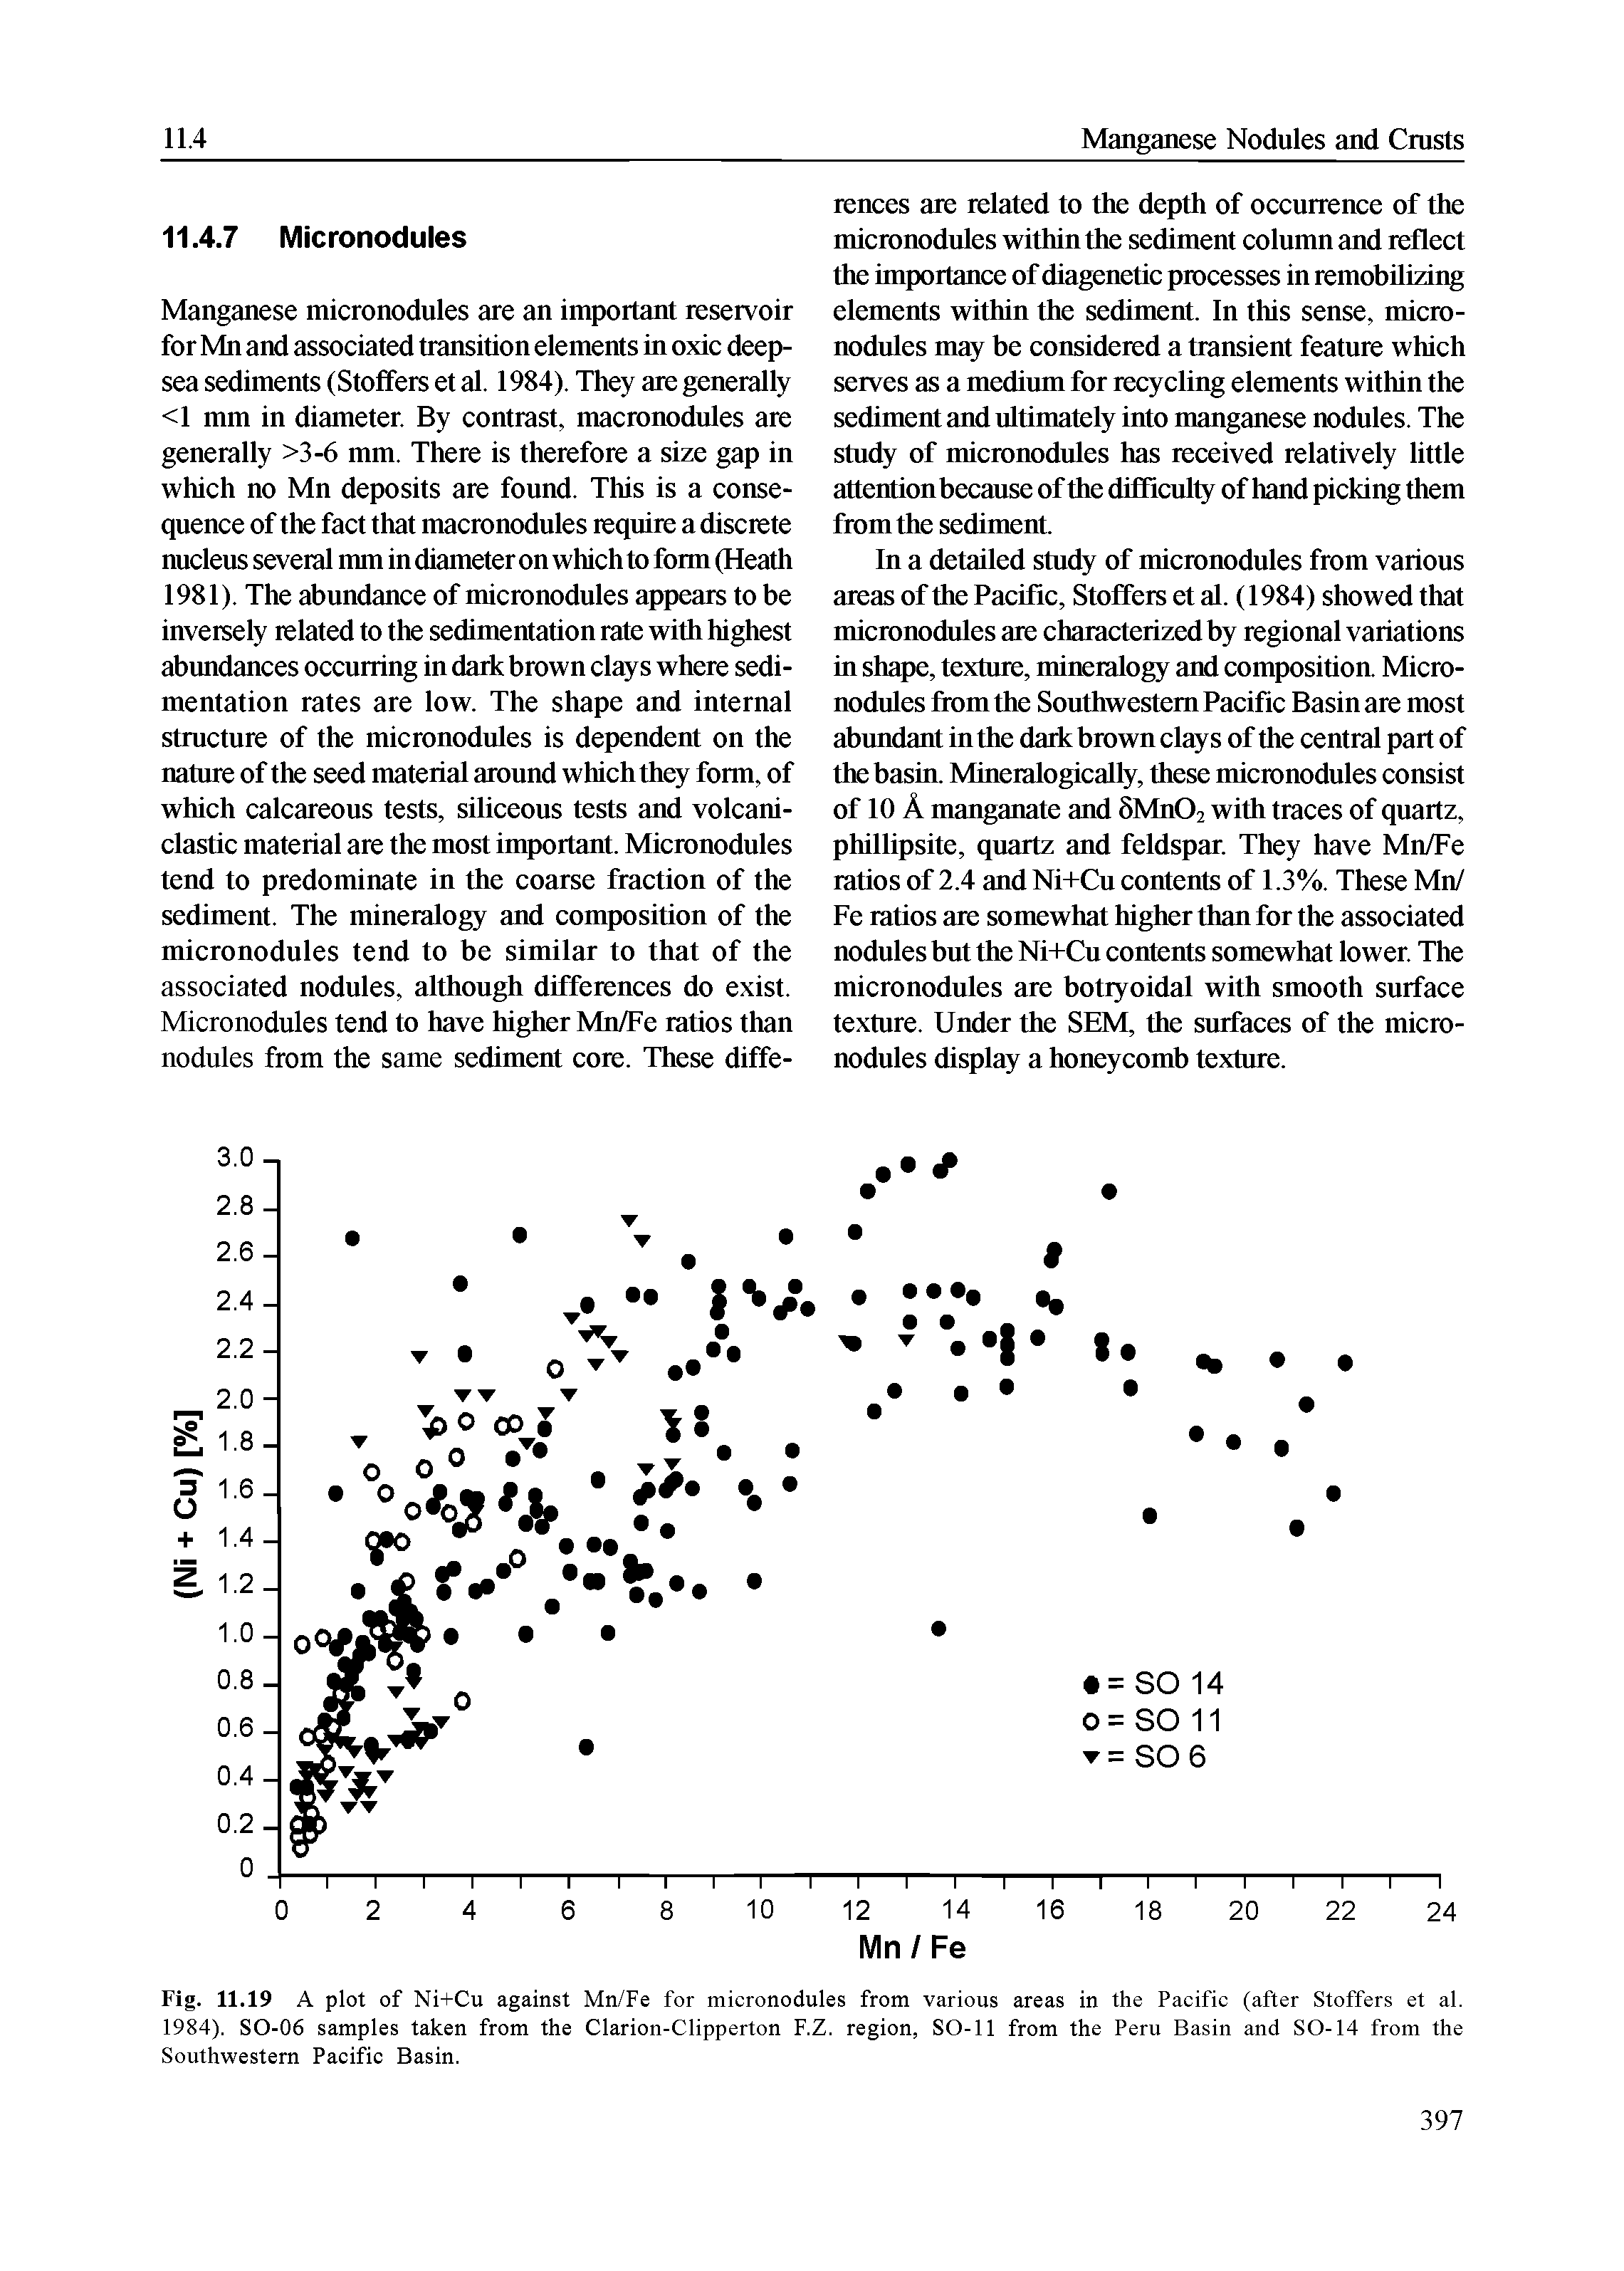 Fig. 11.19 A plot of Ni+Cu against Mn/Fe for micronodules from various areas in the Pacific (after Stoffers et al. 1984). SO-06 samples taken from the Clarion-Clipperton F.Z. region, SO-11 from the Peru Basin and SO-14 from the Southwestern Pacific Basin.